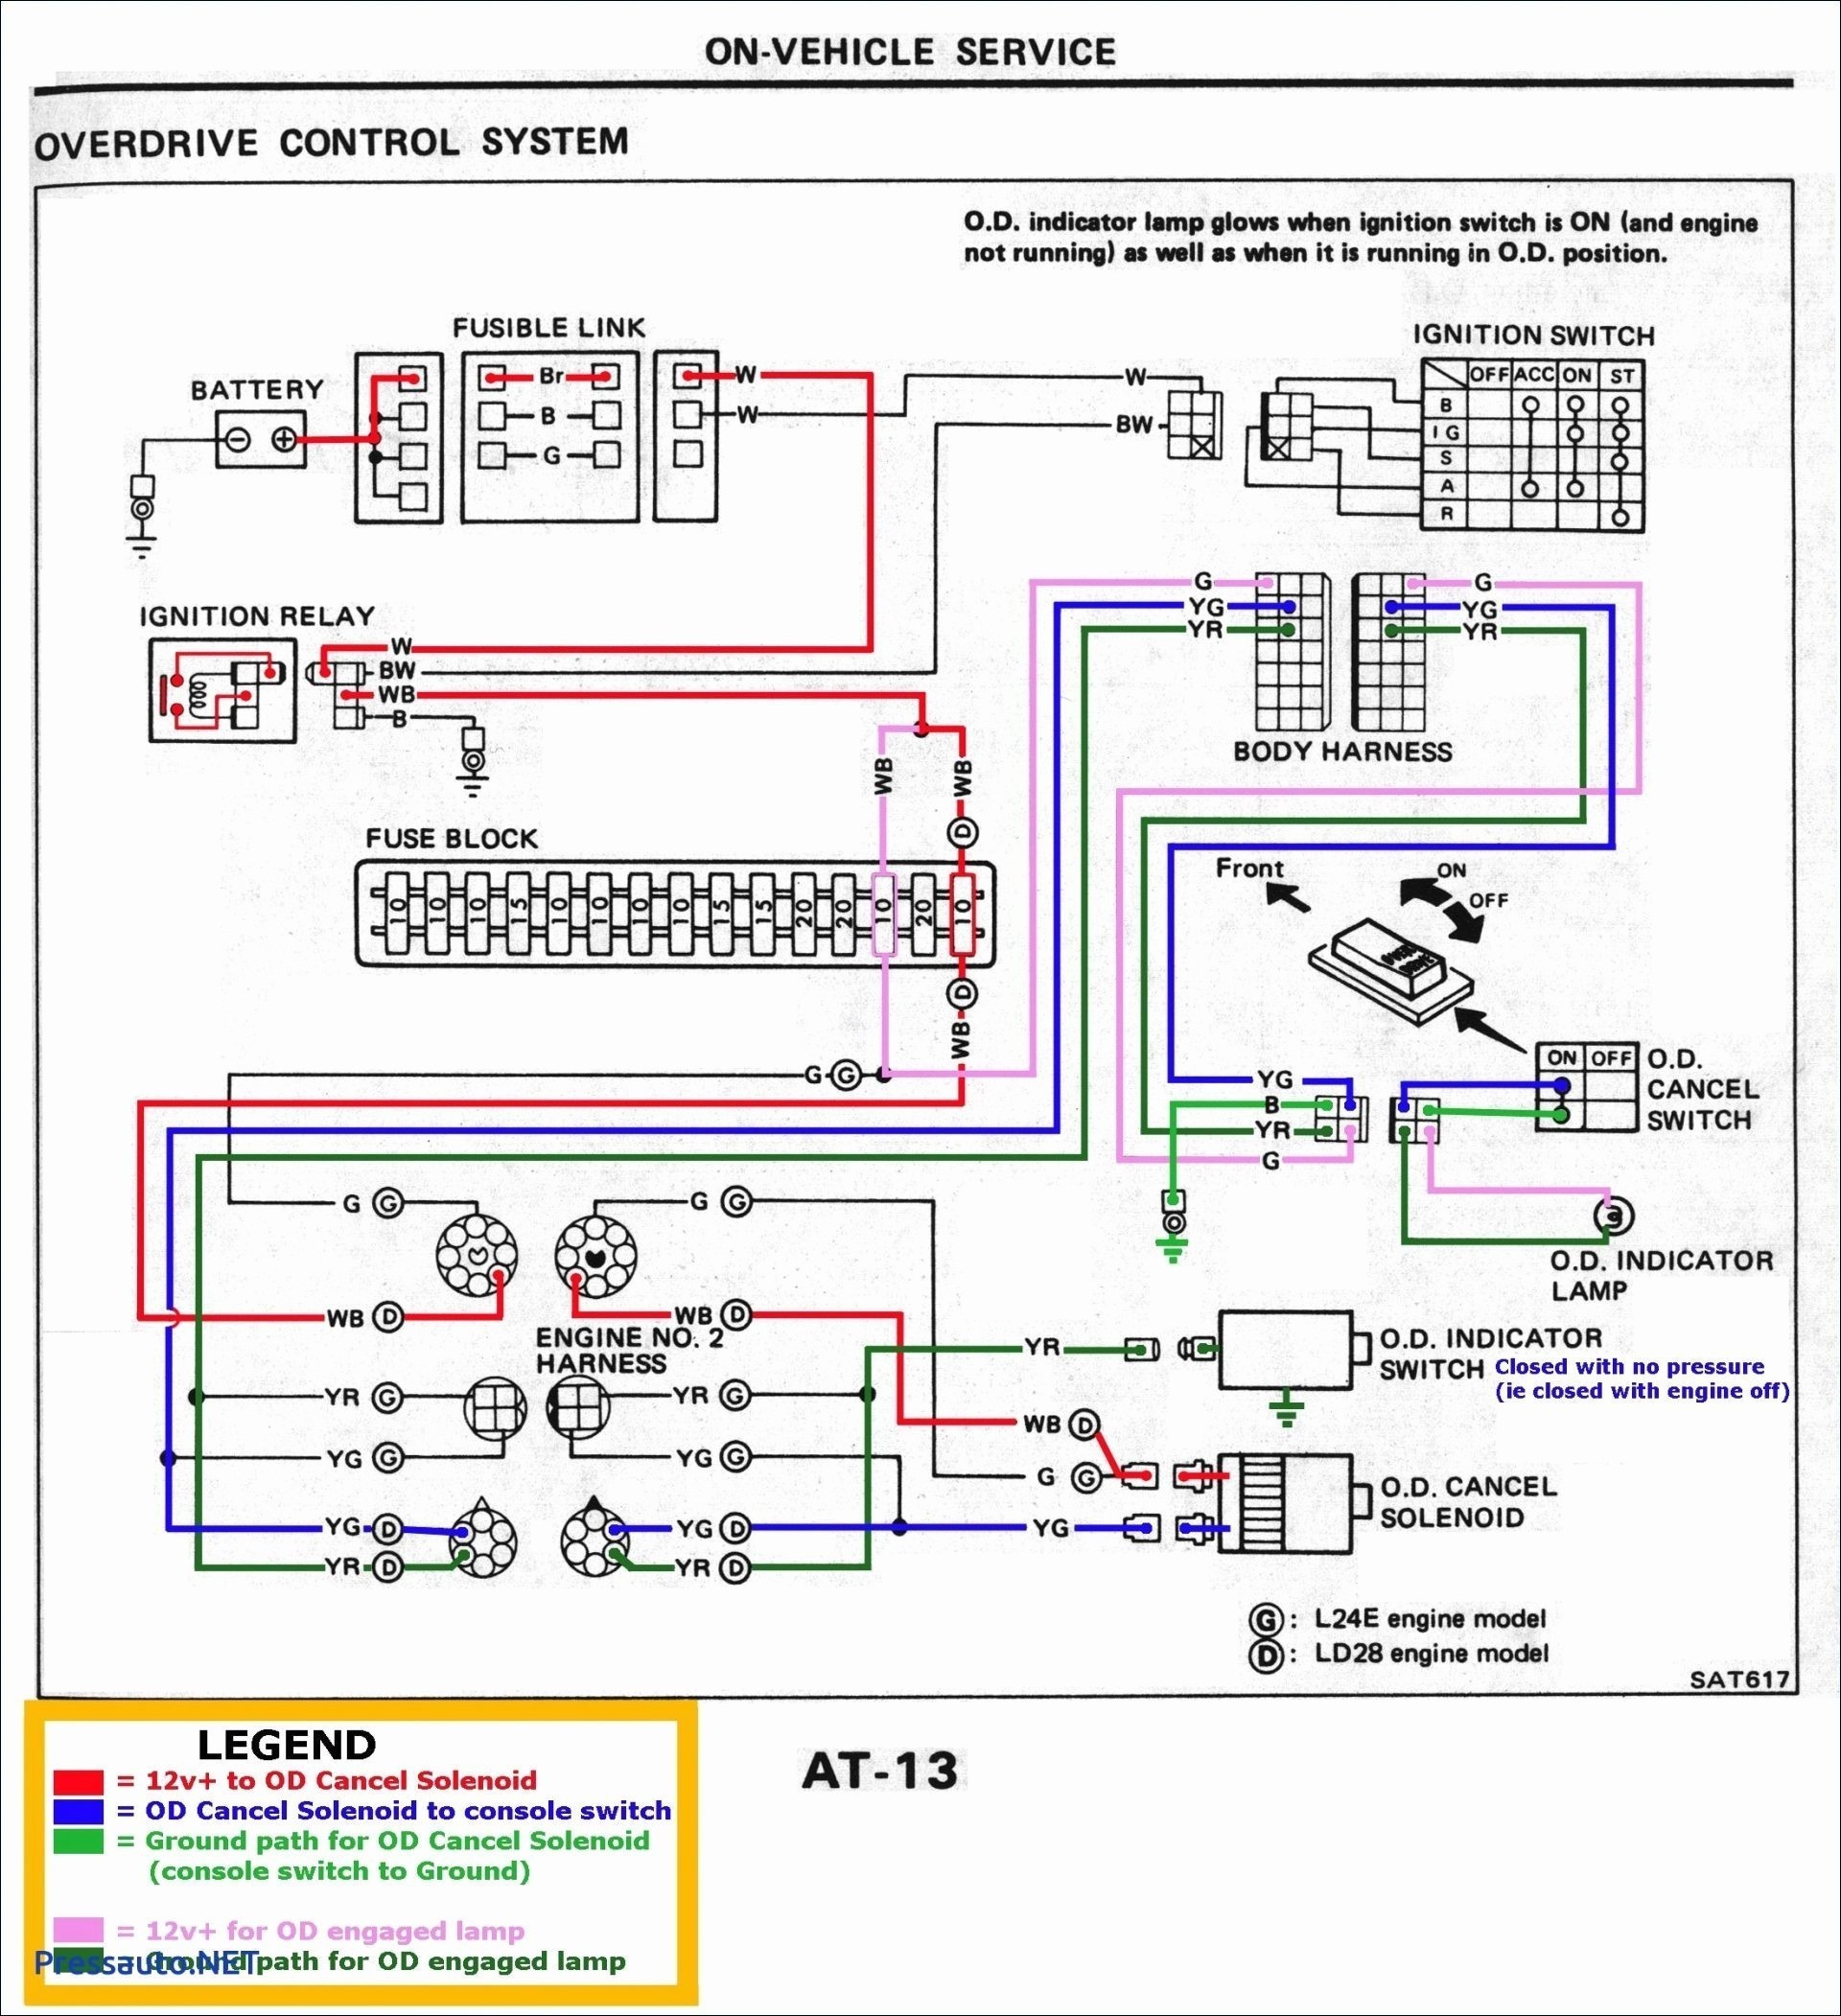 Motorcycle Engine Diagram Dentalstyle Page 7 Of 7 Wiring Diagram for Light Of Motorcycle Engine Diagram